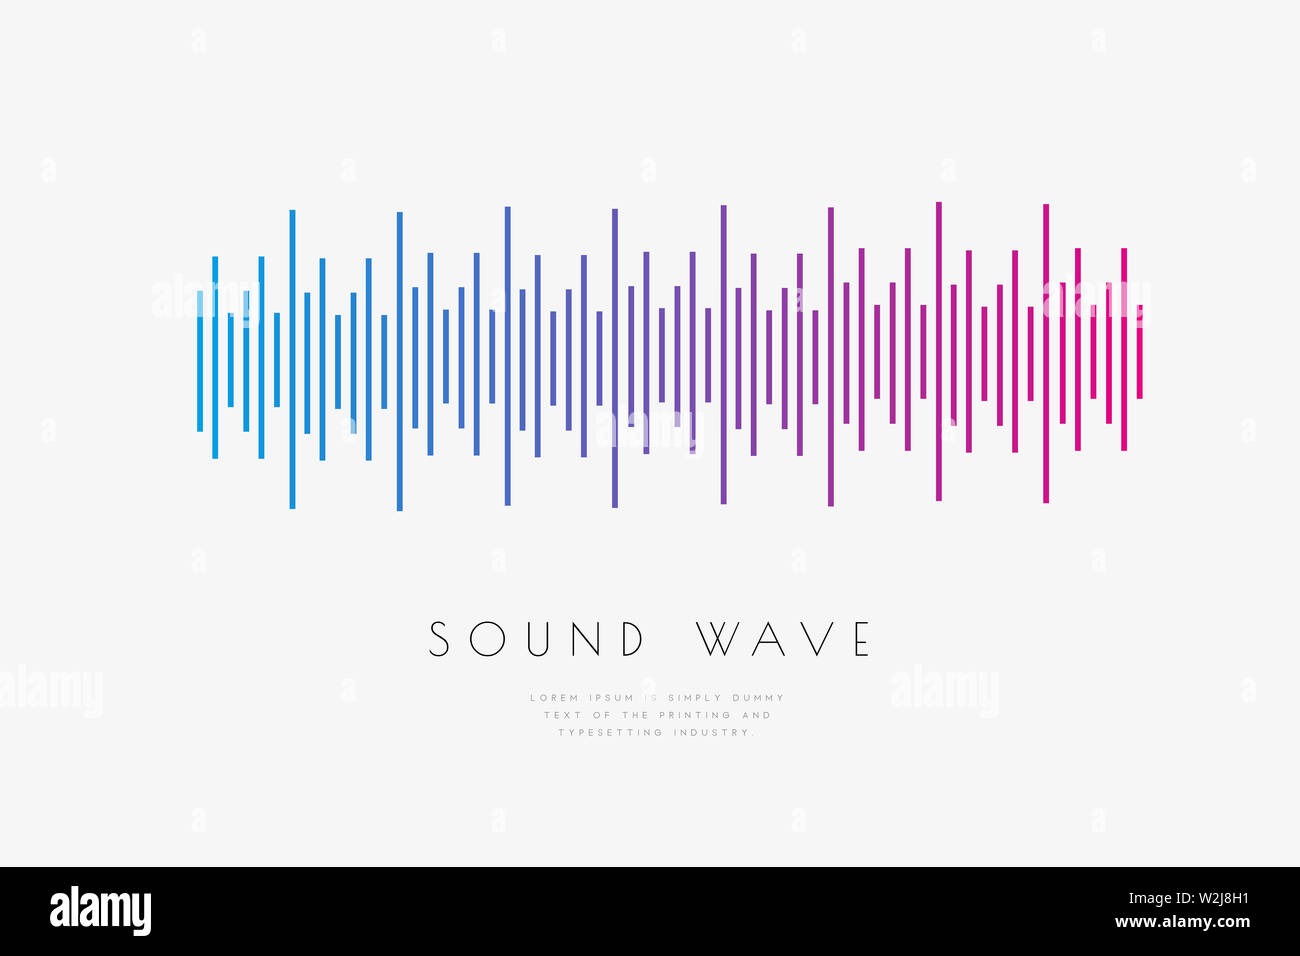 Poster of the sound wave from equalizer. Music soundwave design, light bright elements isolated on light gray backdrop. Abstract background consist of Stock Photo